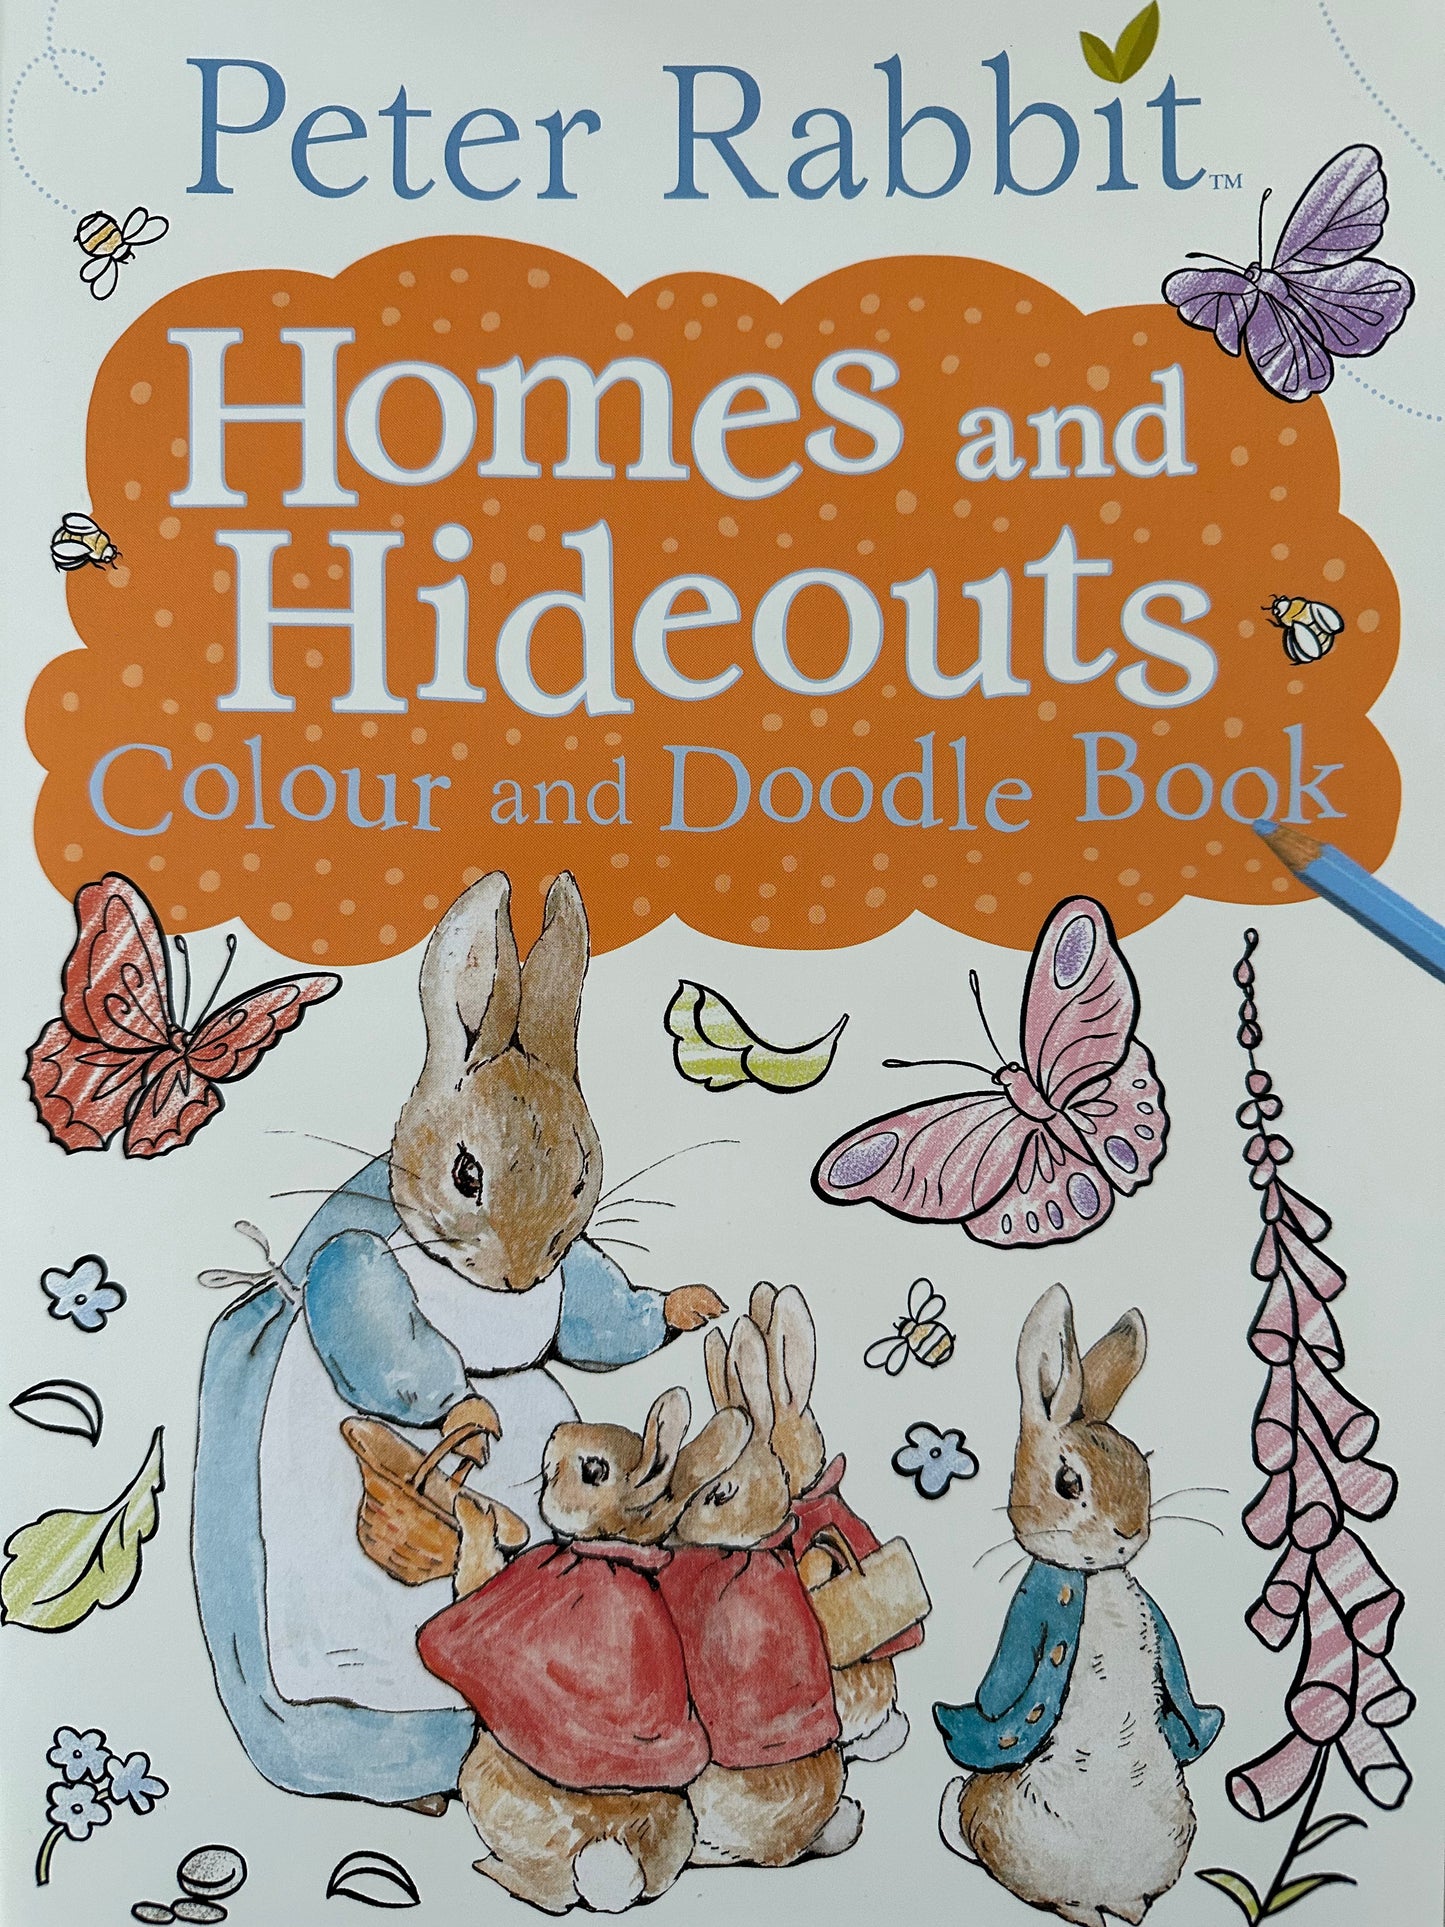 Peter Rabbit Homes And Hideouts Colour And Doodle Book